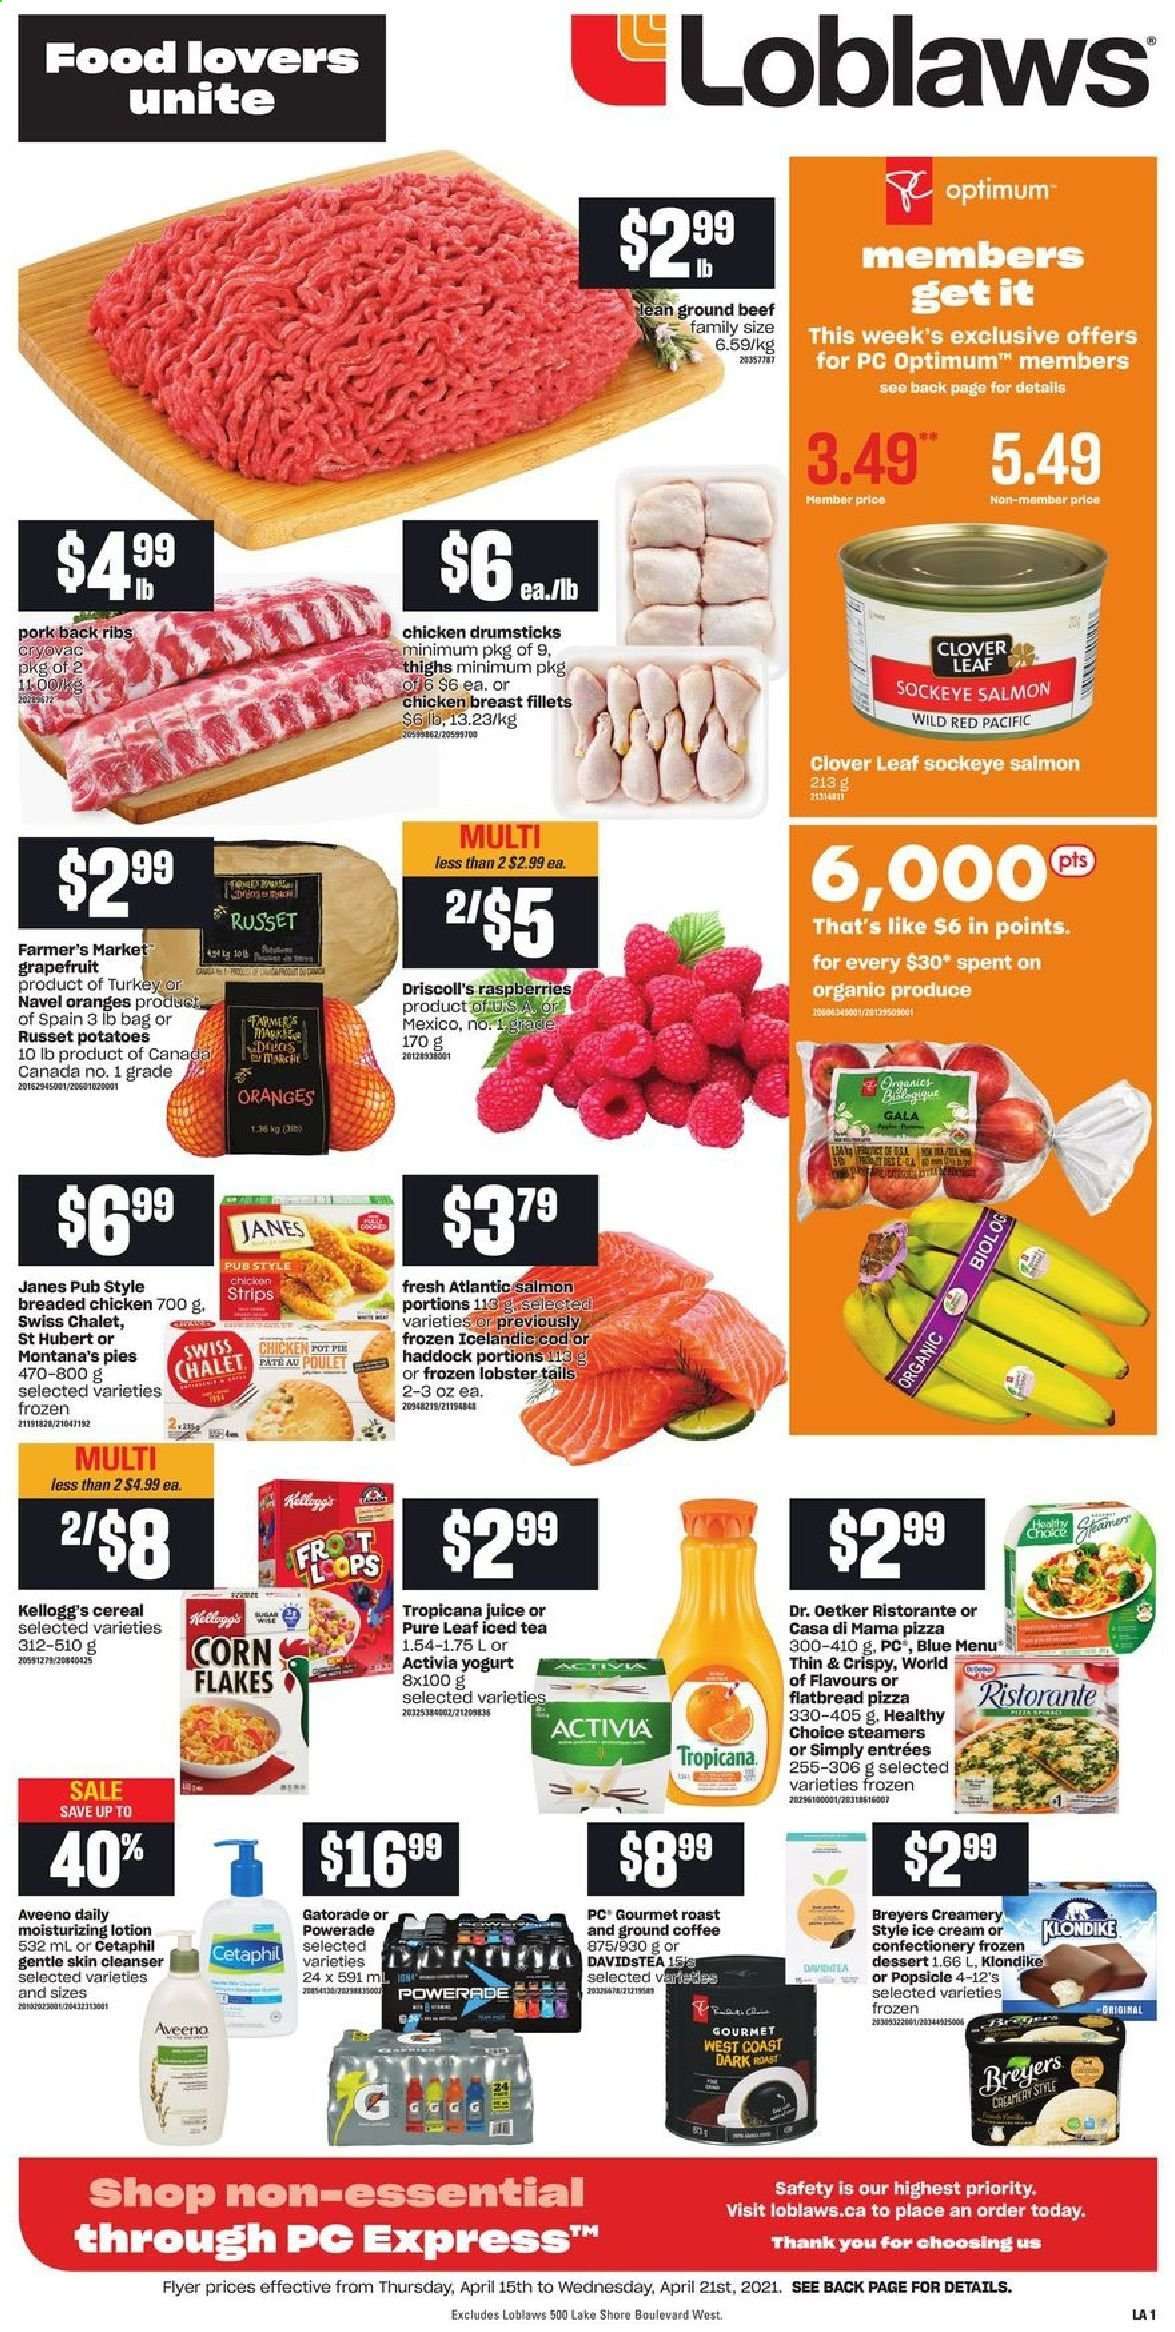 thumbnail - Loblaws Flyer - April 15, 2021 - April 21, 2021 - Sales products - pie, flatbread, russet potatoes, potatoes, Gala, grapefruits, navel oranges, cod, lobster, salmon, haddock, lobster tail, pizza, fried chicken, Healthy Choice, Dr. Oetker, yoghurt, Clover, Activia, ice cream, strips, Kellogg's, cereals, corn flakes, Powerade, juice, ice tea, Gatorade, Pure Leaf, coffee, ground coffee, chicken drumsticks, chicken, beef meat, ground beef, pork meat, pork ribs, pork back ribs, Aveeno, cleanser, body lotion, Optimum. Page 1.